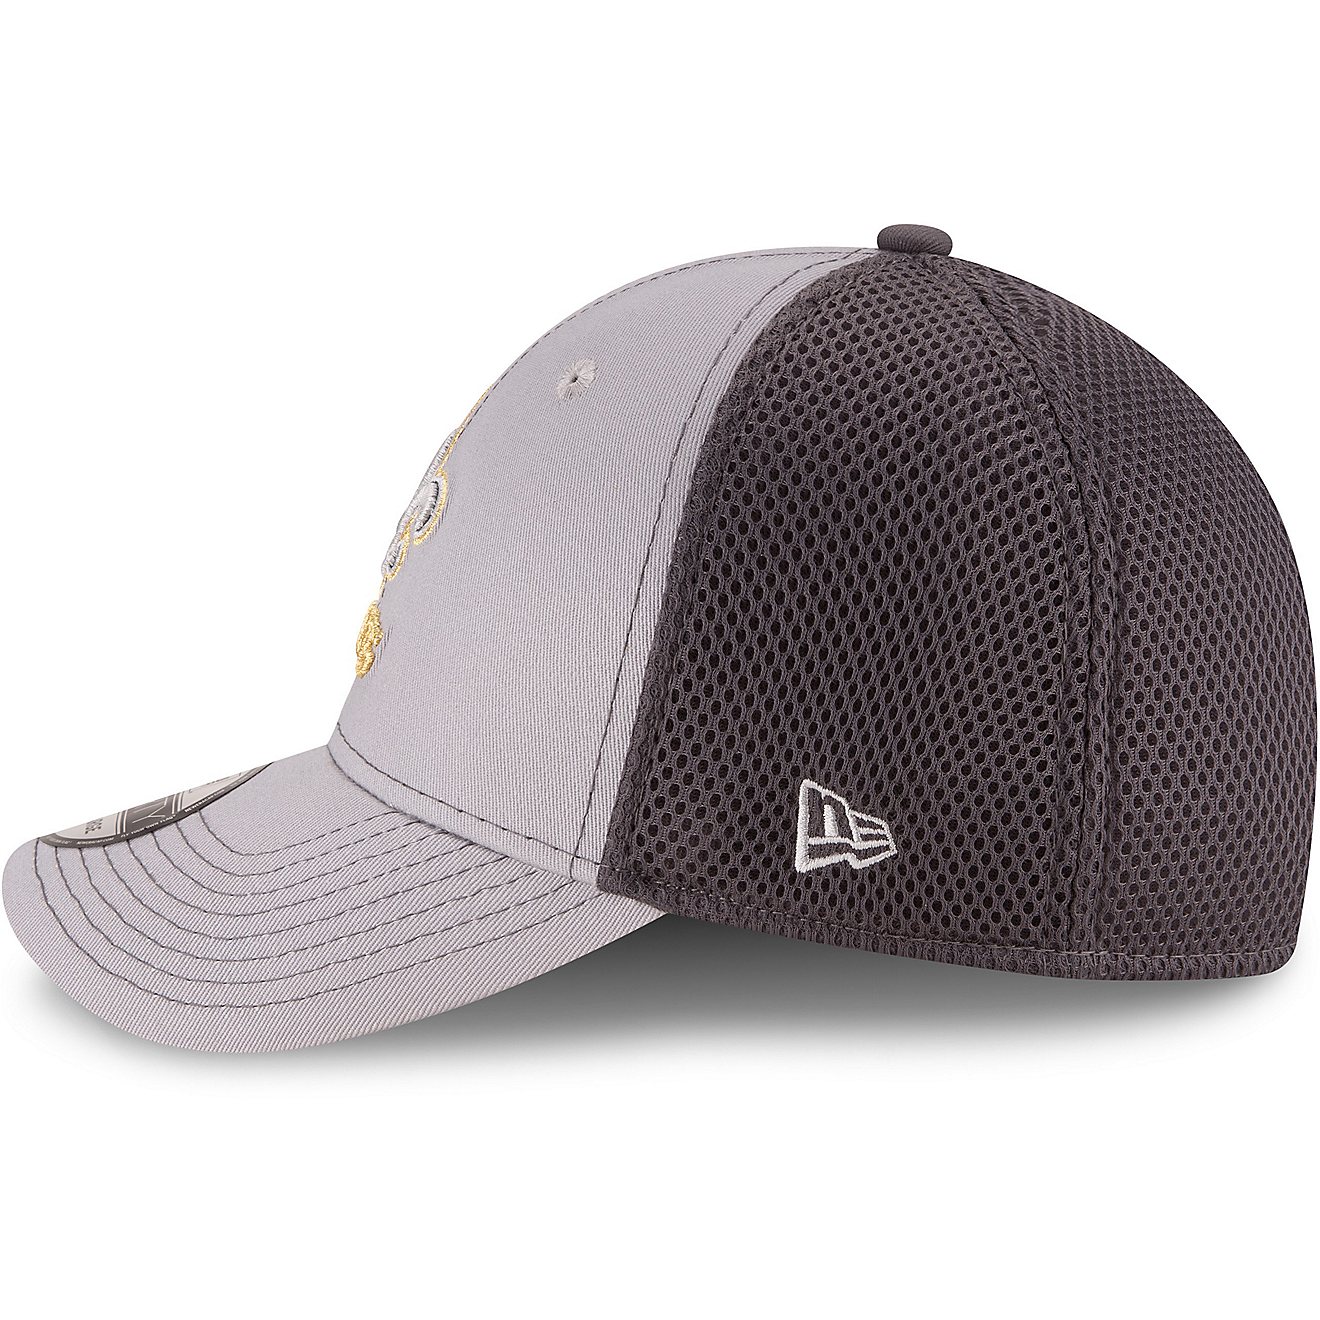 New Era Men's New Orleans Saints 39THIRTY Grayed Out Cap                                                                         - view number 6